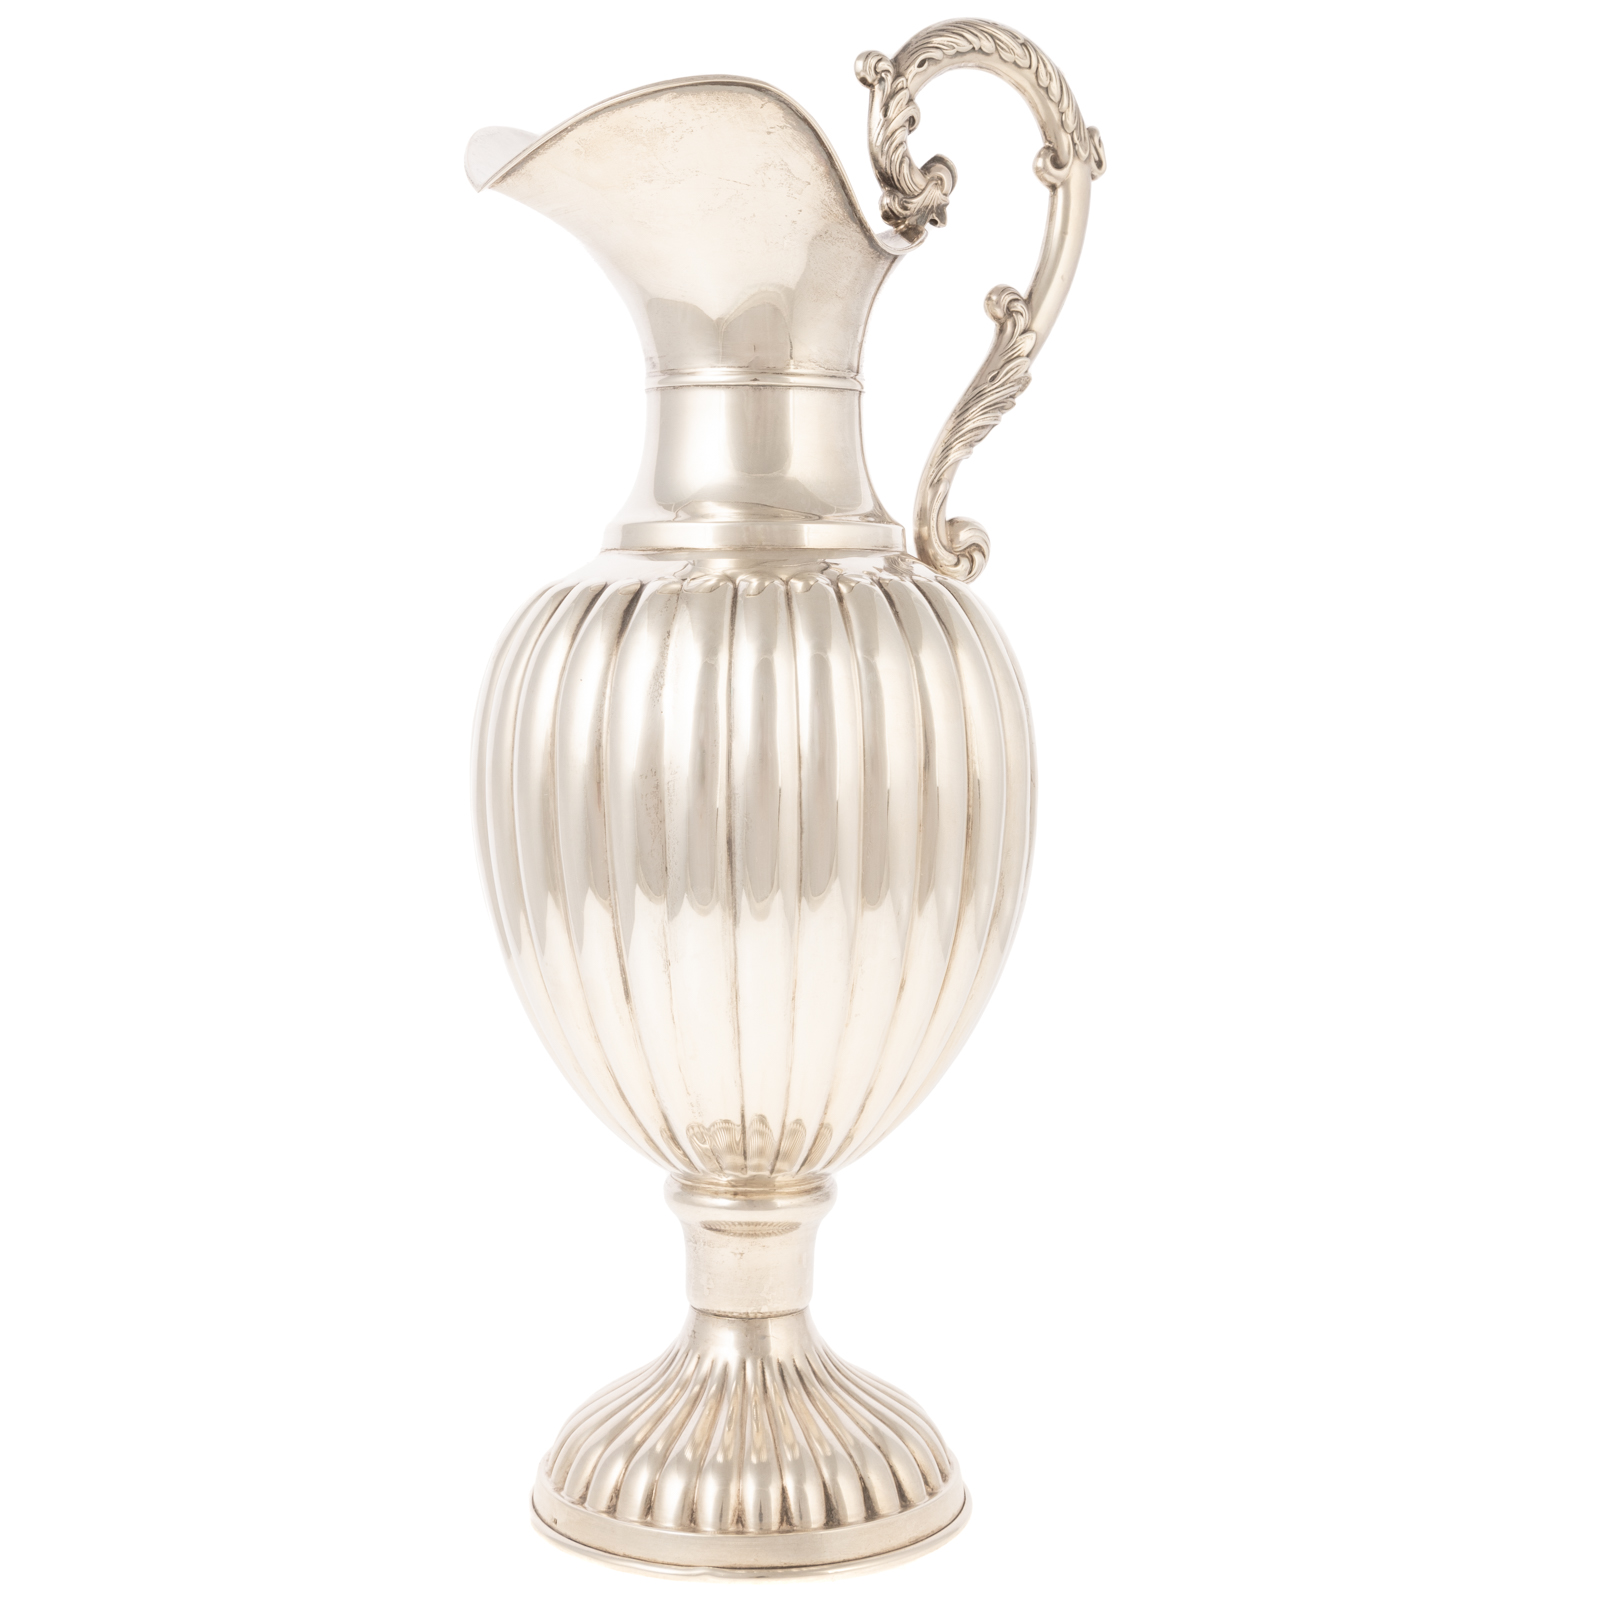 SPANISH STERLING WATER PITCHER